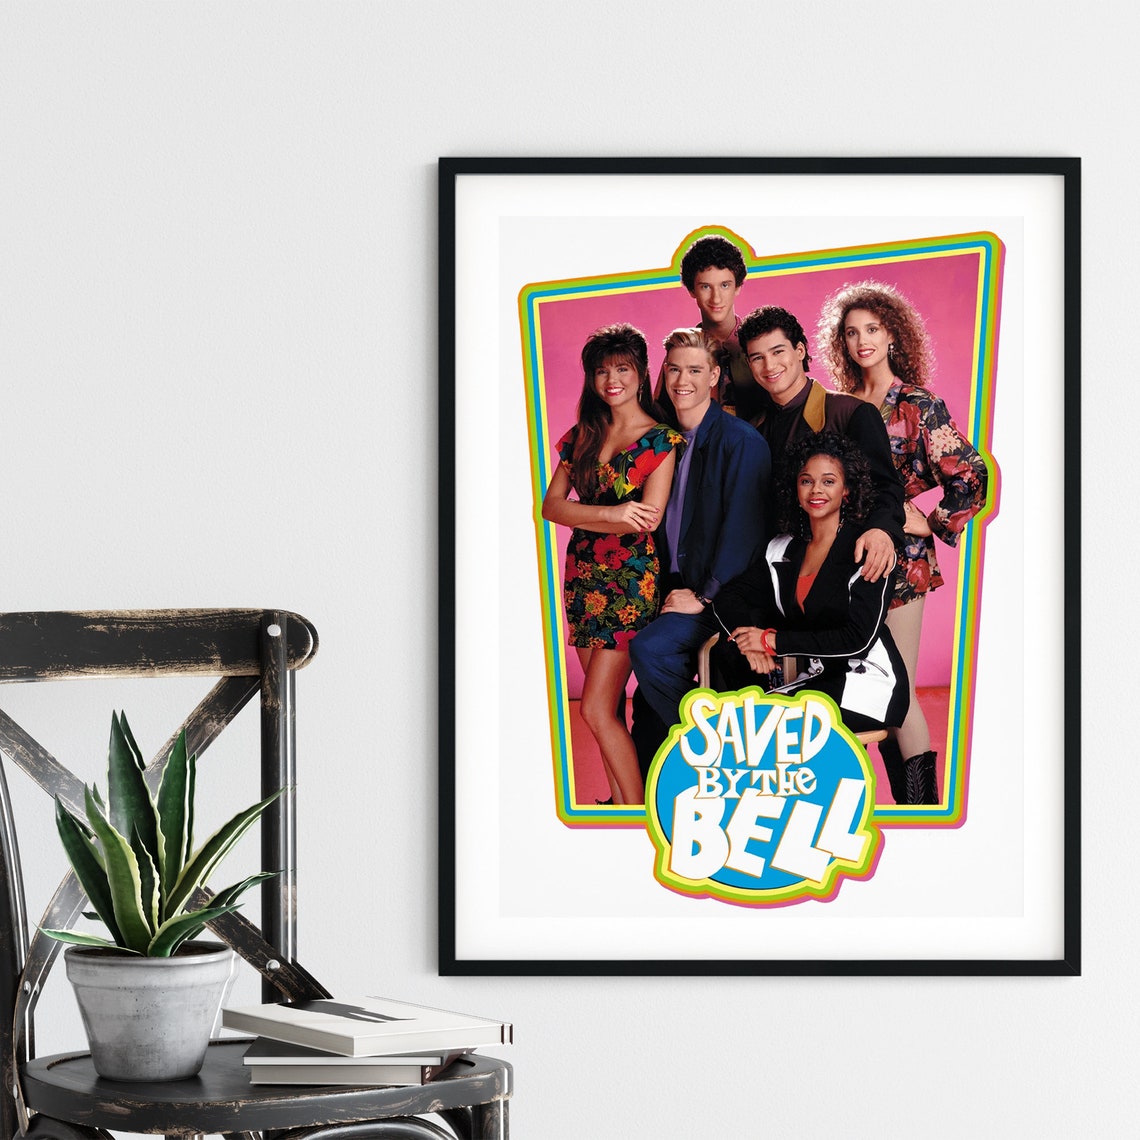 Saved By The Bell Poster Etsy